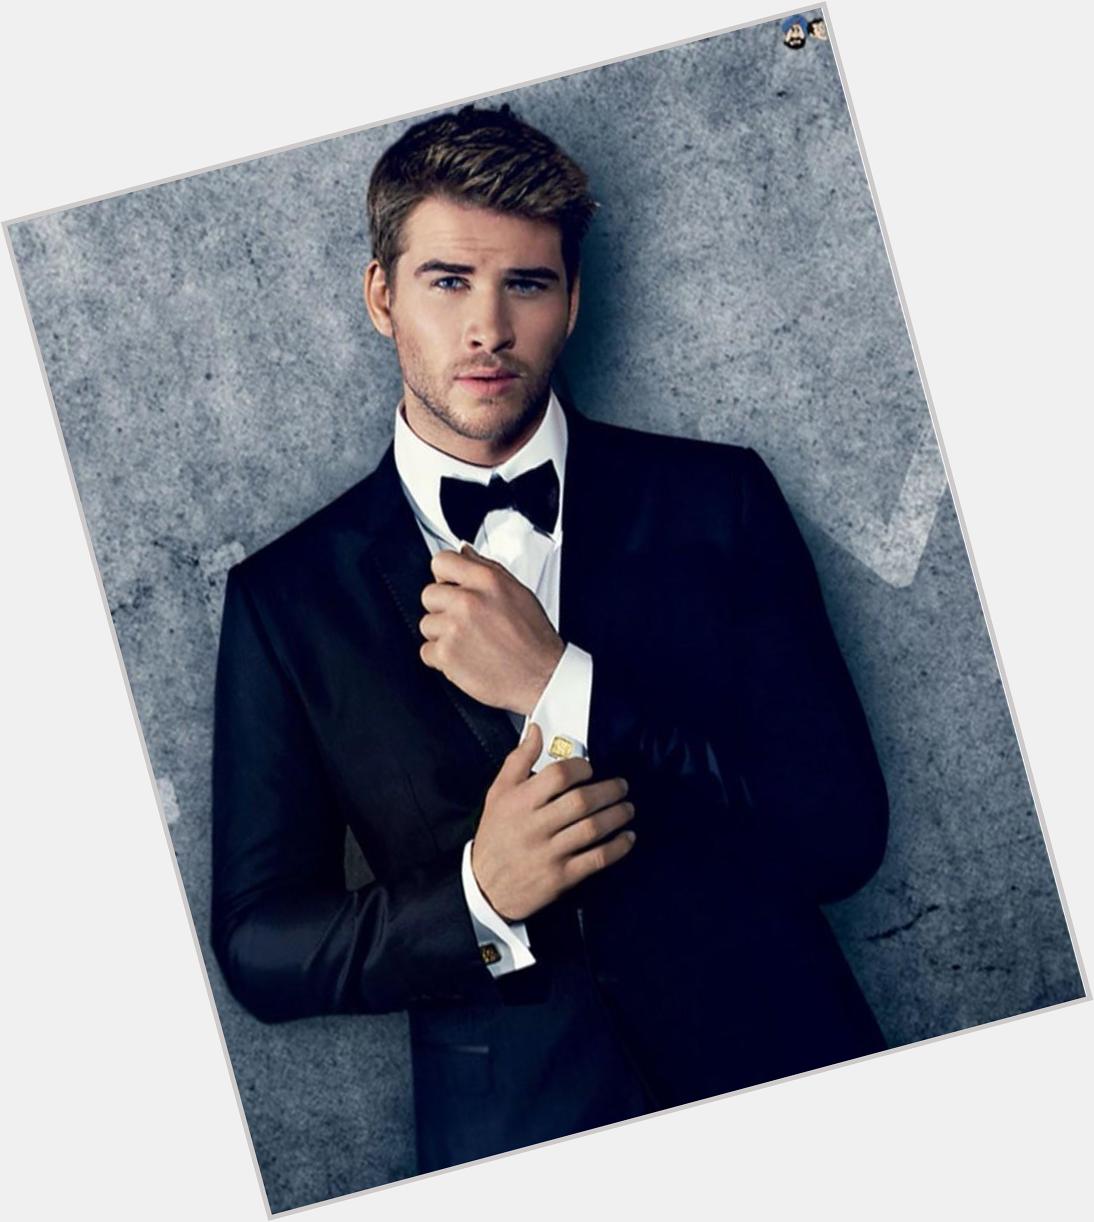 Remessage if you want to wish Liam Hemsworth a Happy 25th Birthday. 